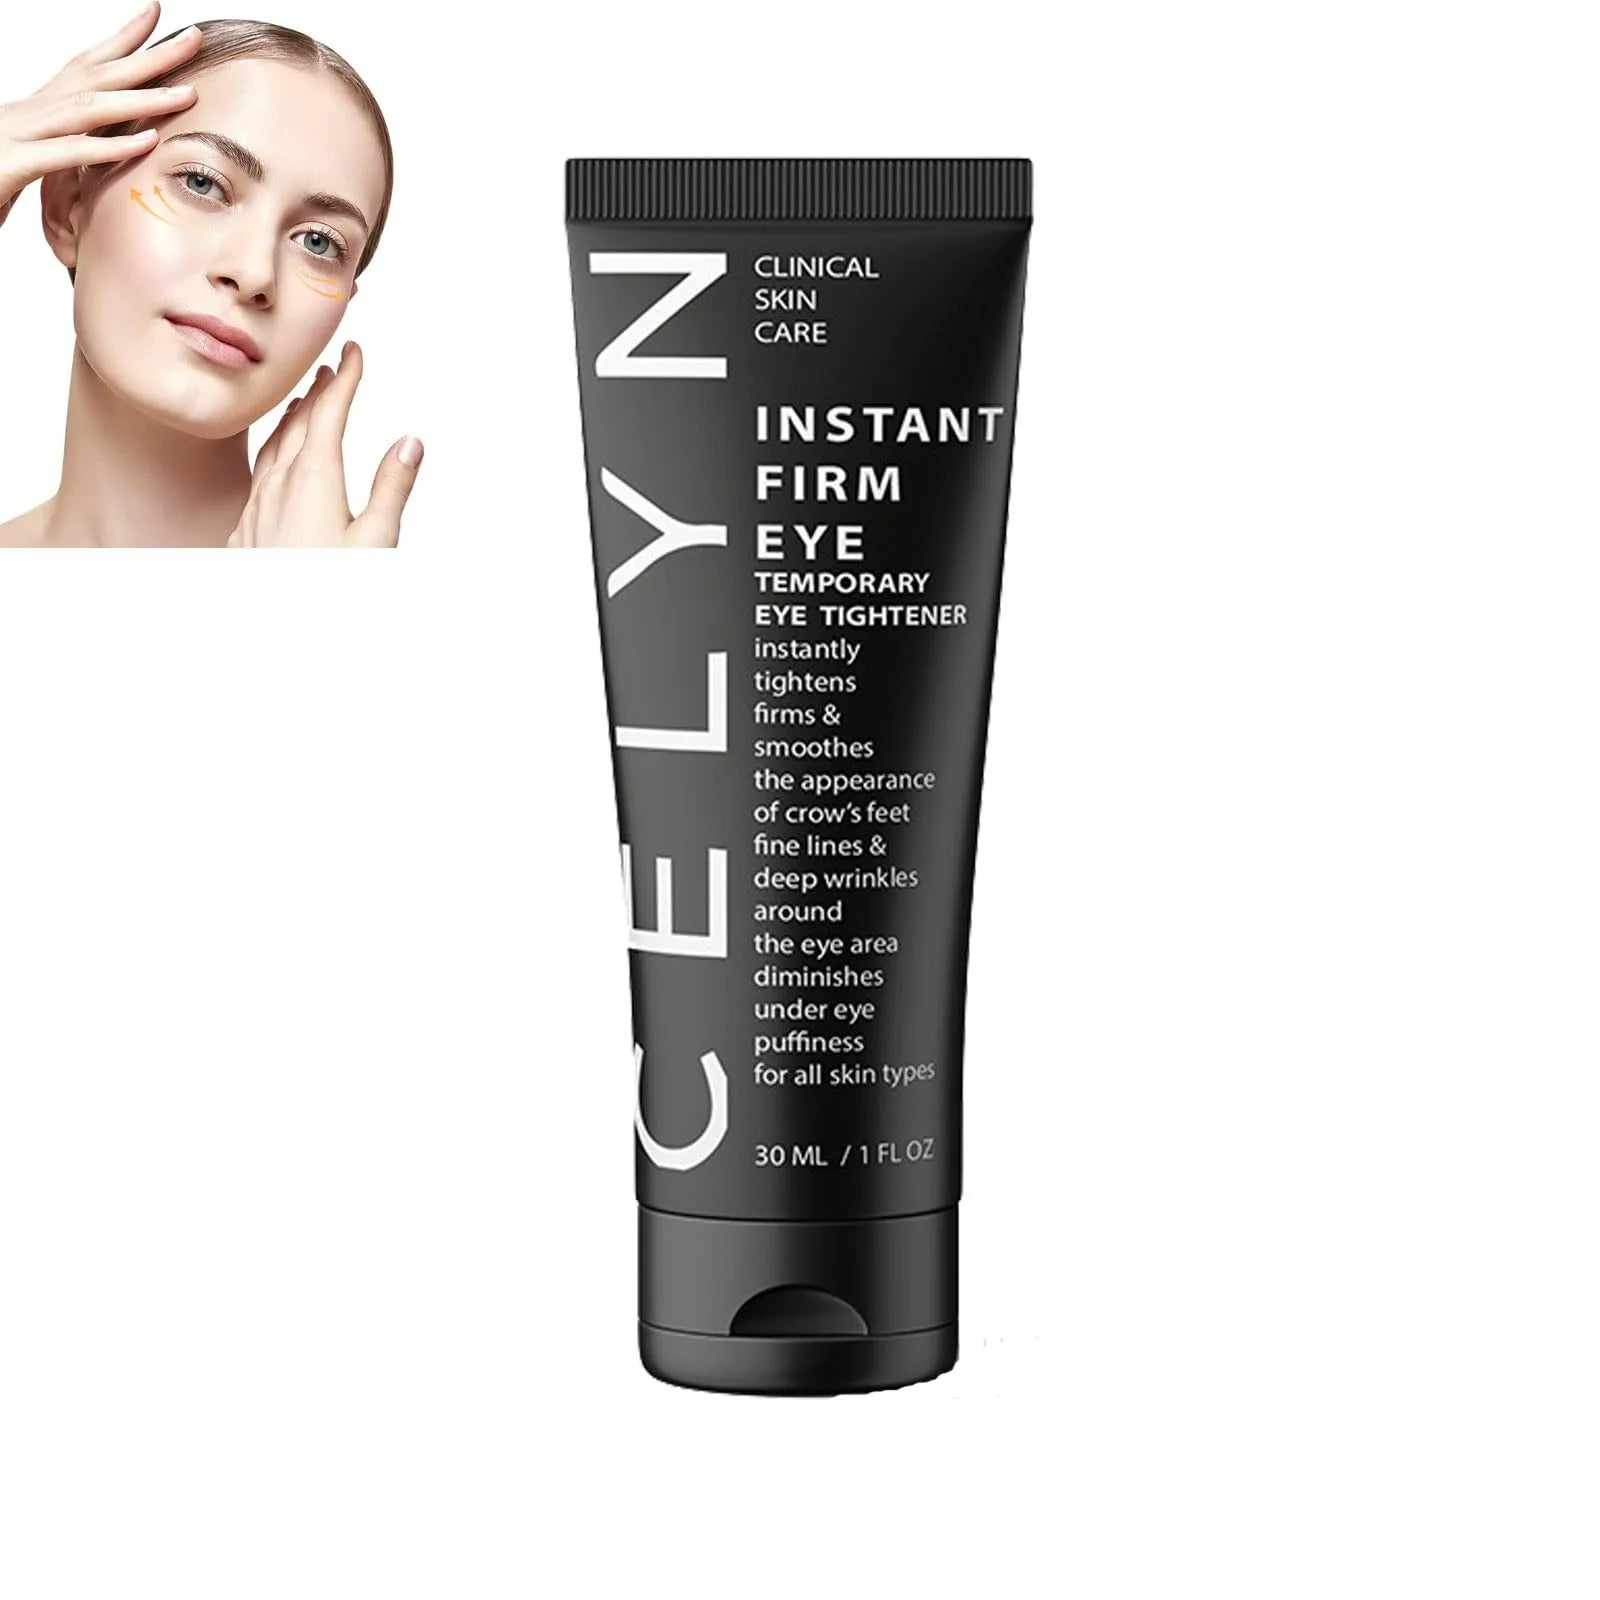 Instant Firm Eye Tightener: Say Goodbye to Under-Eye Bags and Dark Circles